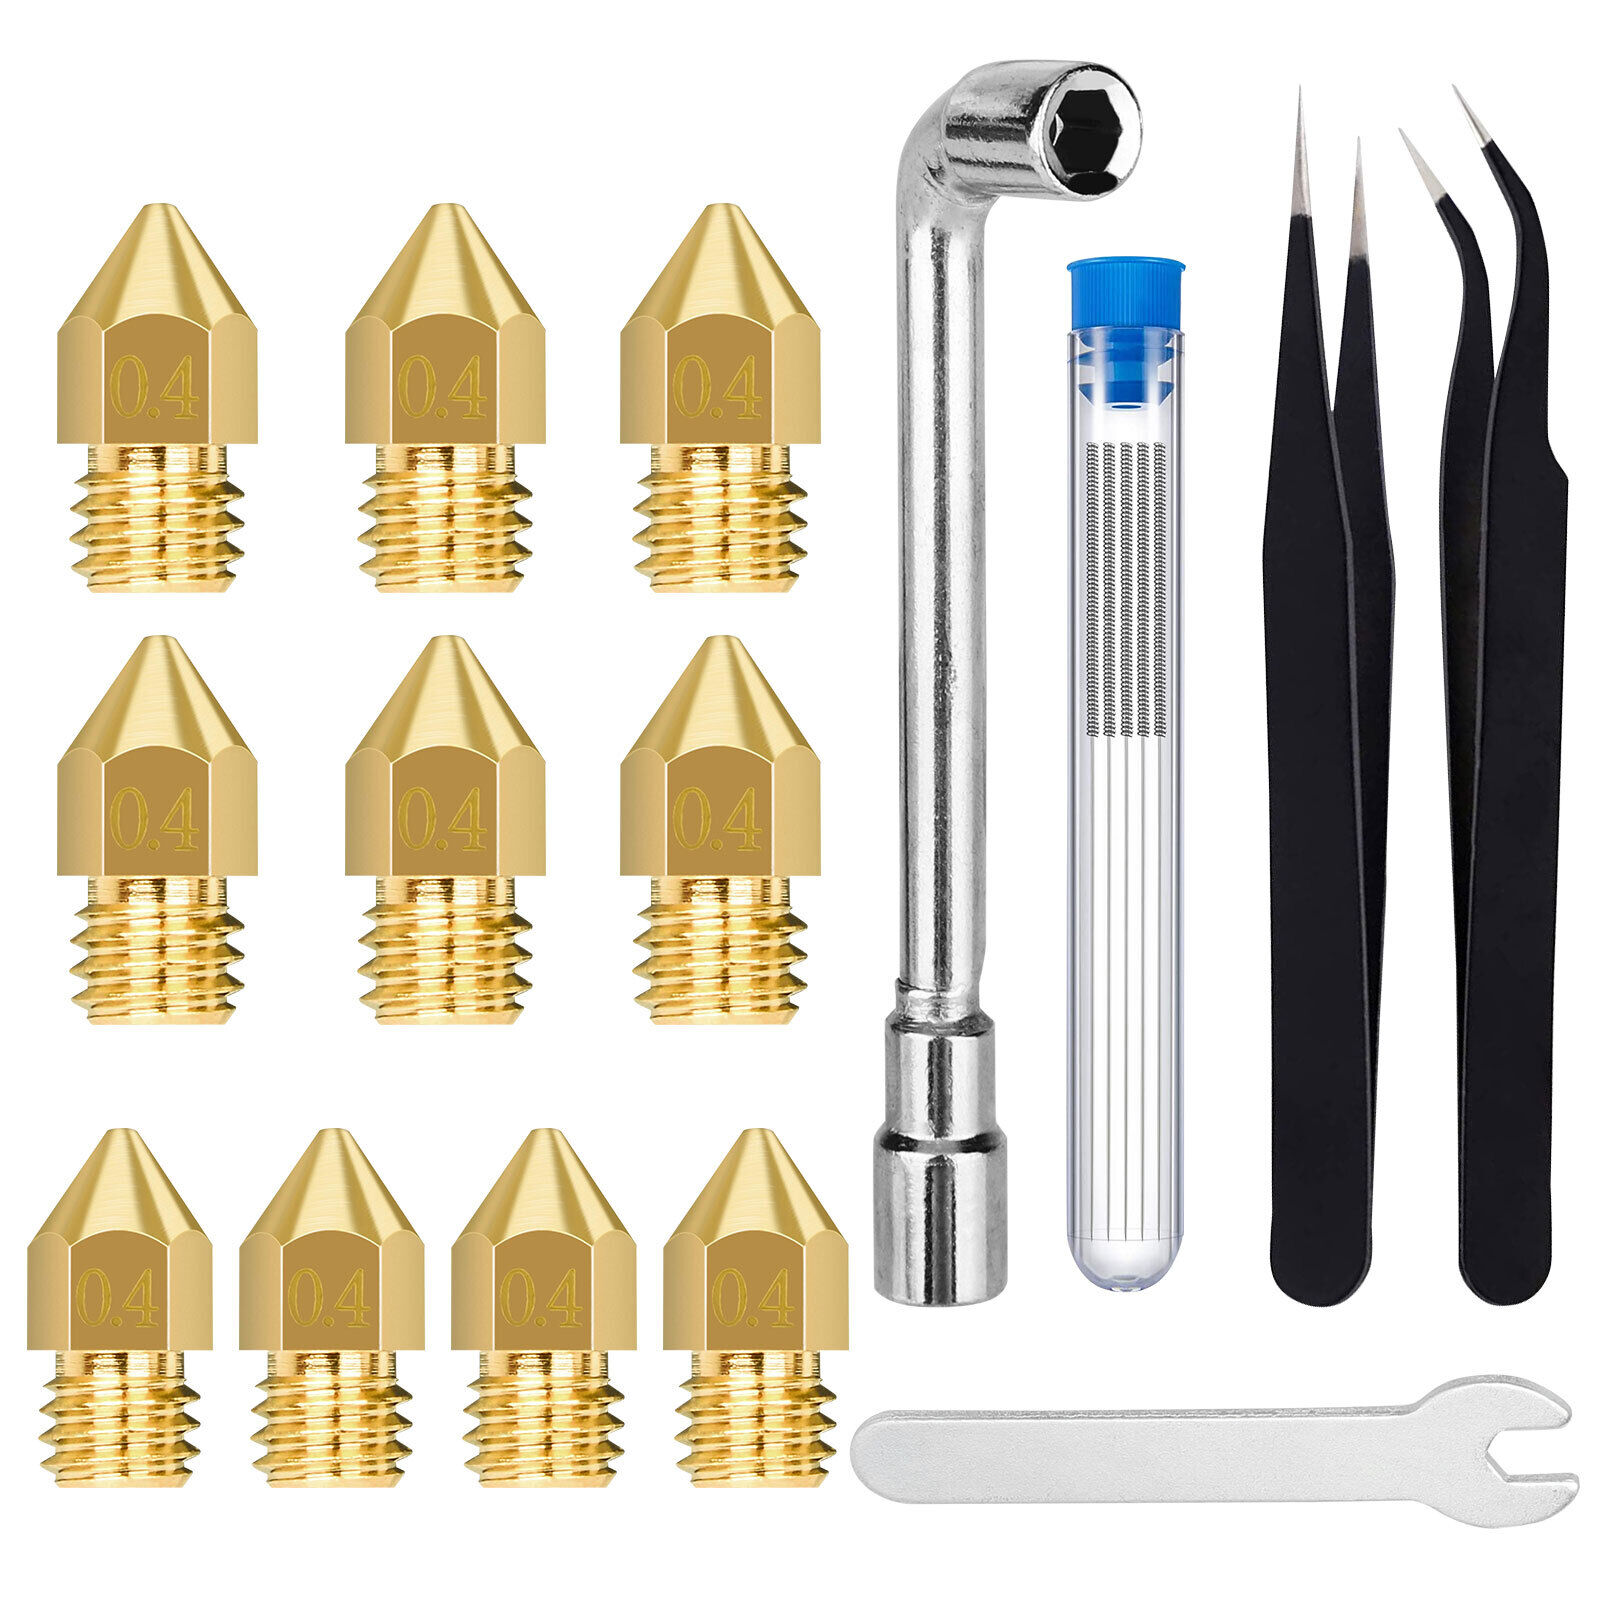 19Pcs 0.4mm 3D Printer Extruder Nozzle Cleaning Needles Tool Kit for CR-10/Ender